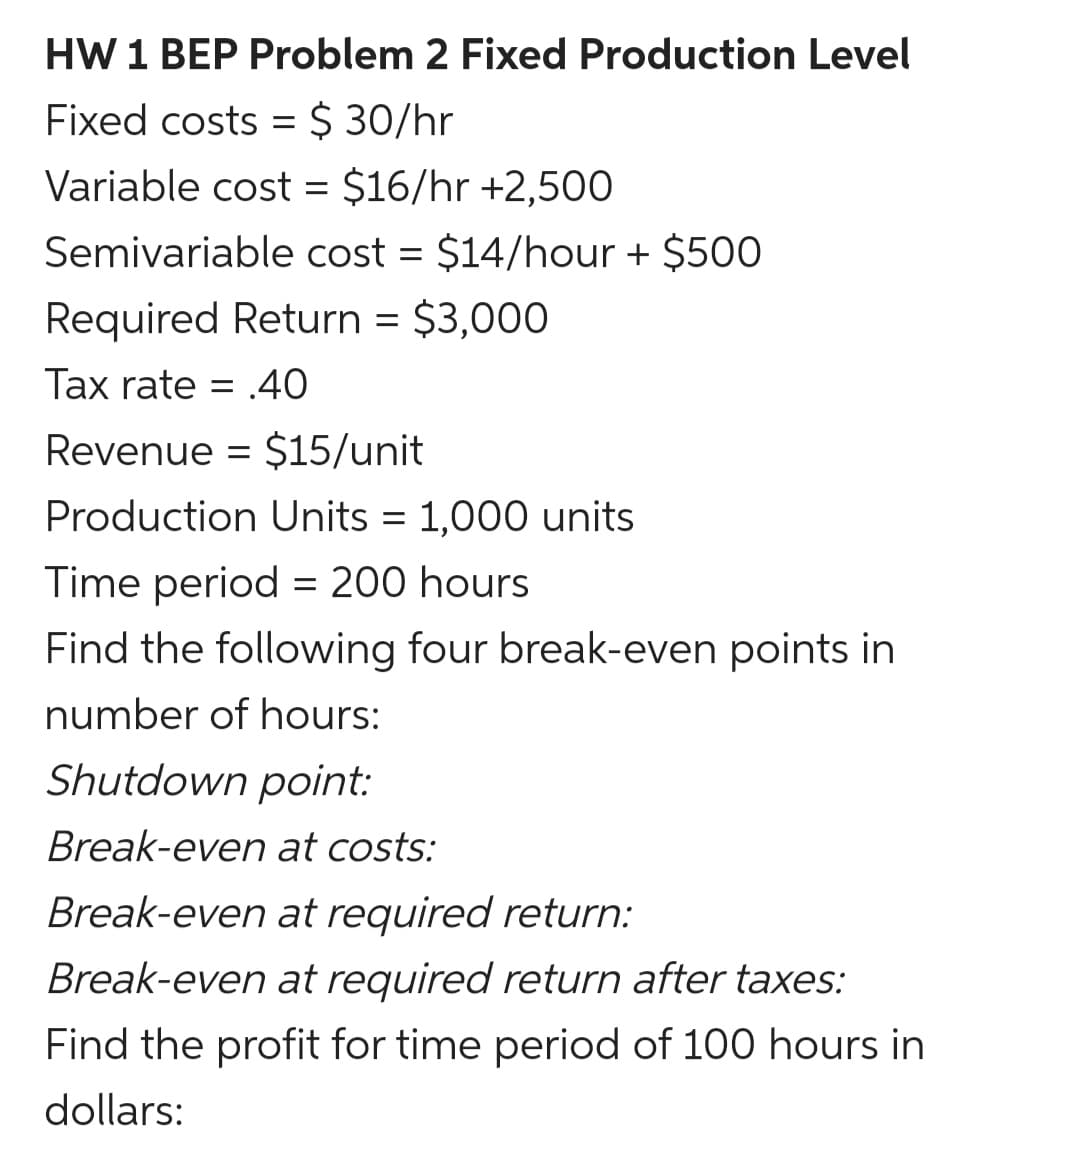 HW 1 BEP Problem 2 Fixed Production Level
Fixed costs = $ 30/hr
Variable cost = $16/hr +2,500
Semivariable cost = $14/hour + $500
Required Return = $3,000
Tax rate = .40
Revenue = $15/unit
Production Units = 1,000 units
Time period = 200 hours
Find the following four break-even points in
number of hours:
Shutdown point:
Break-even at costs:
Break-even at required return:
Break-even at required return after taxes:
Find the profit for time period of 100 hours in
dollars:
